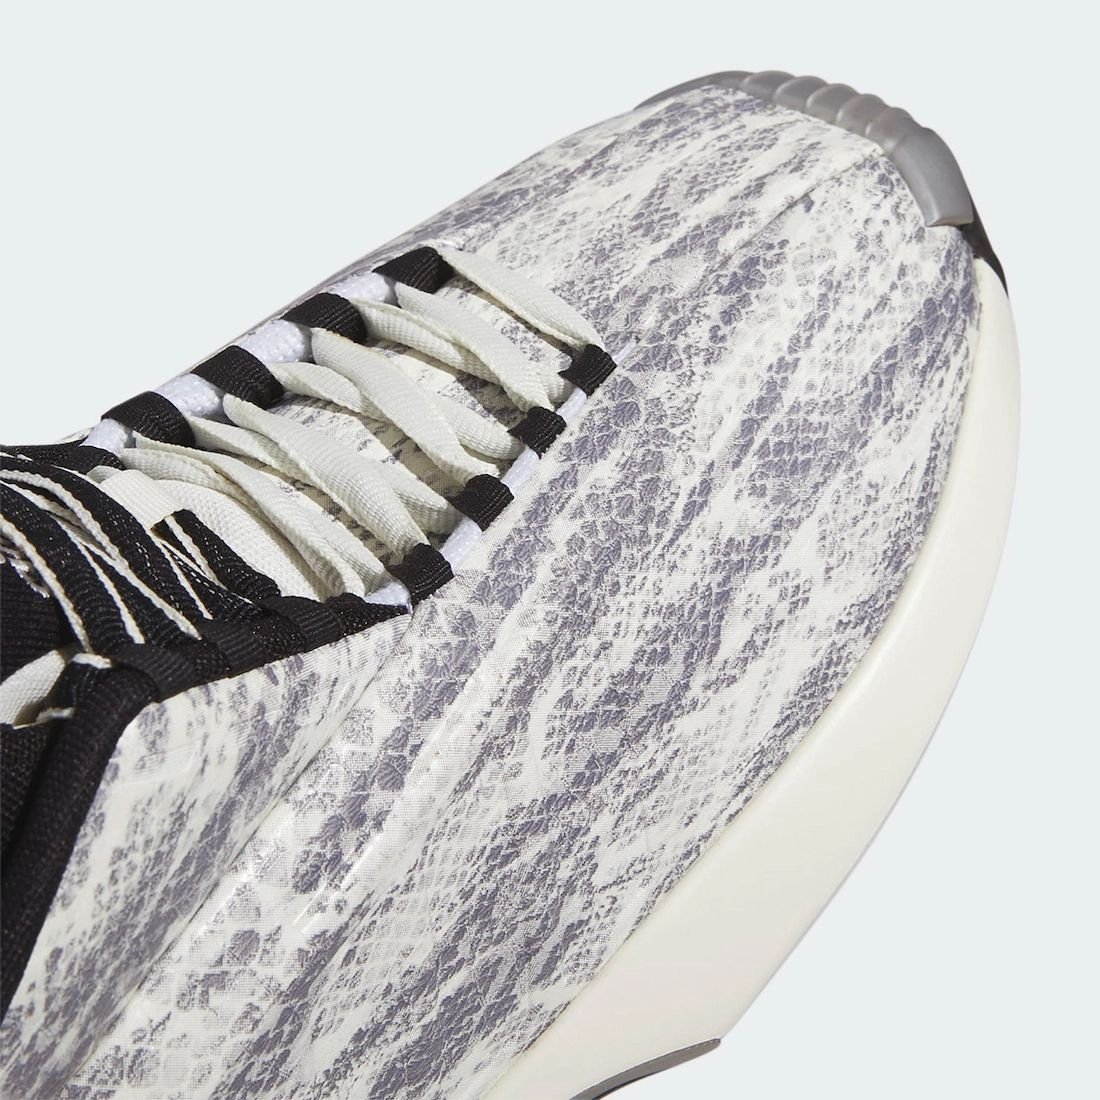 adidas Crazy 1 Snakeskin GY2405 Release Date Info